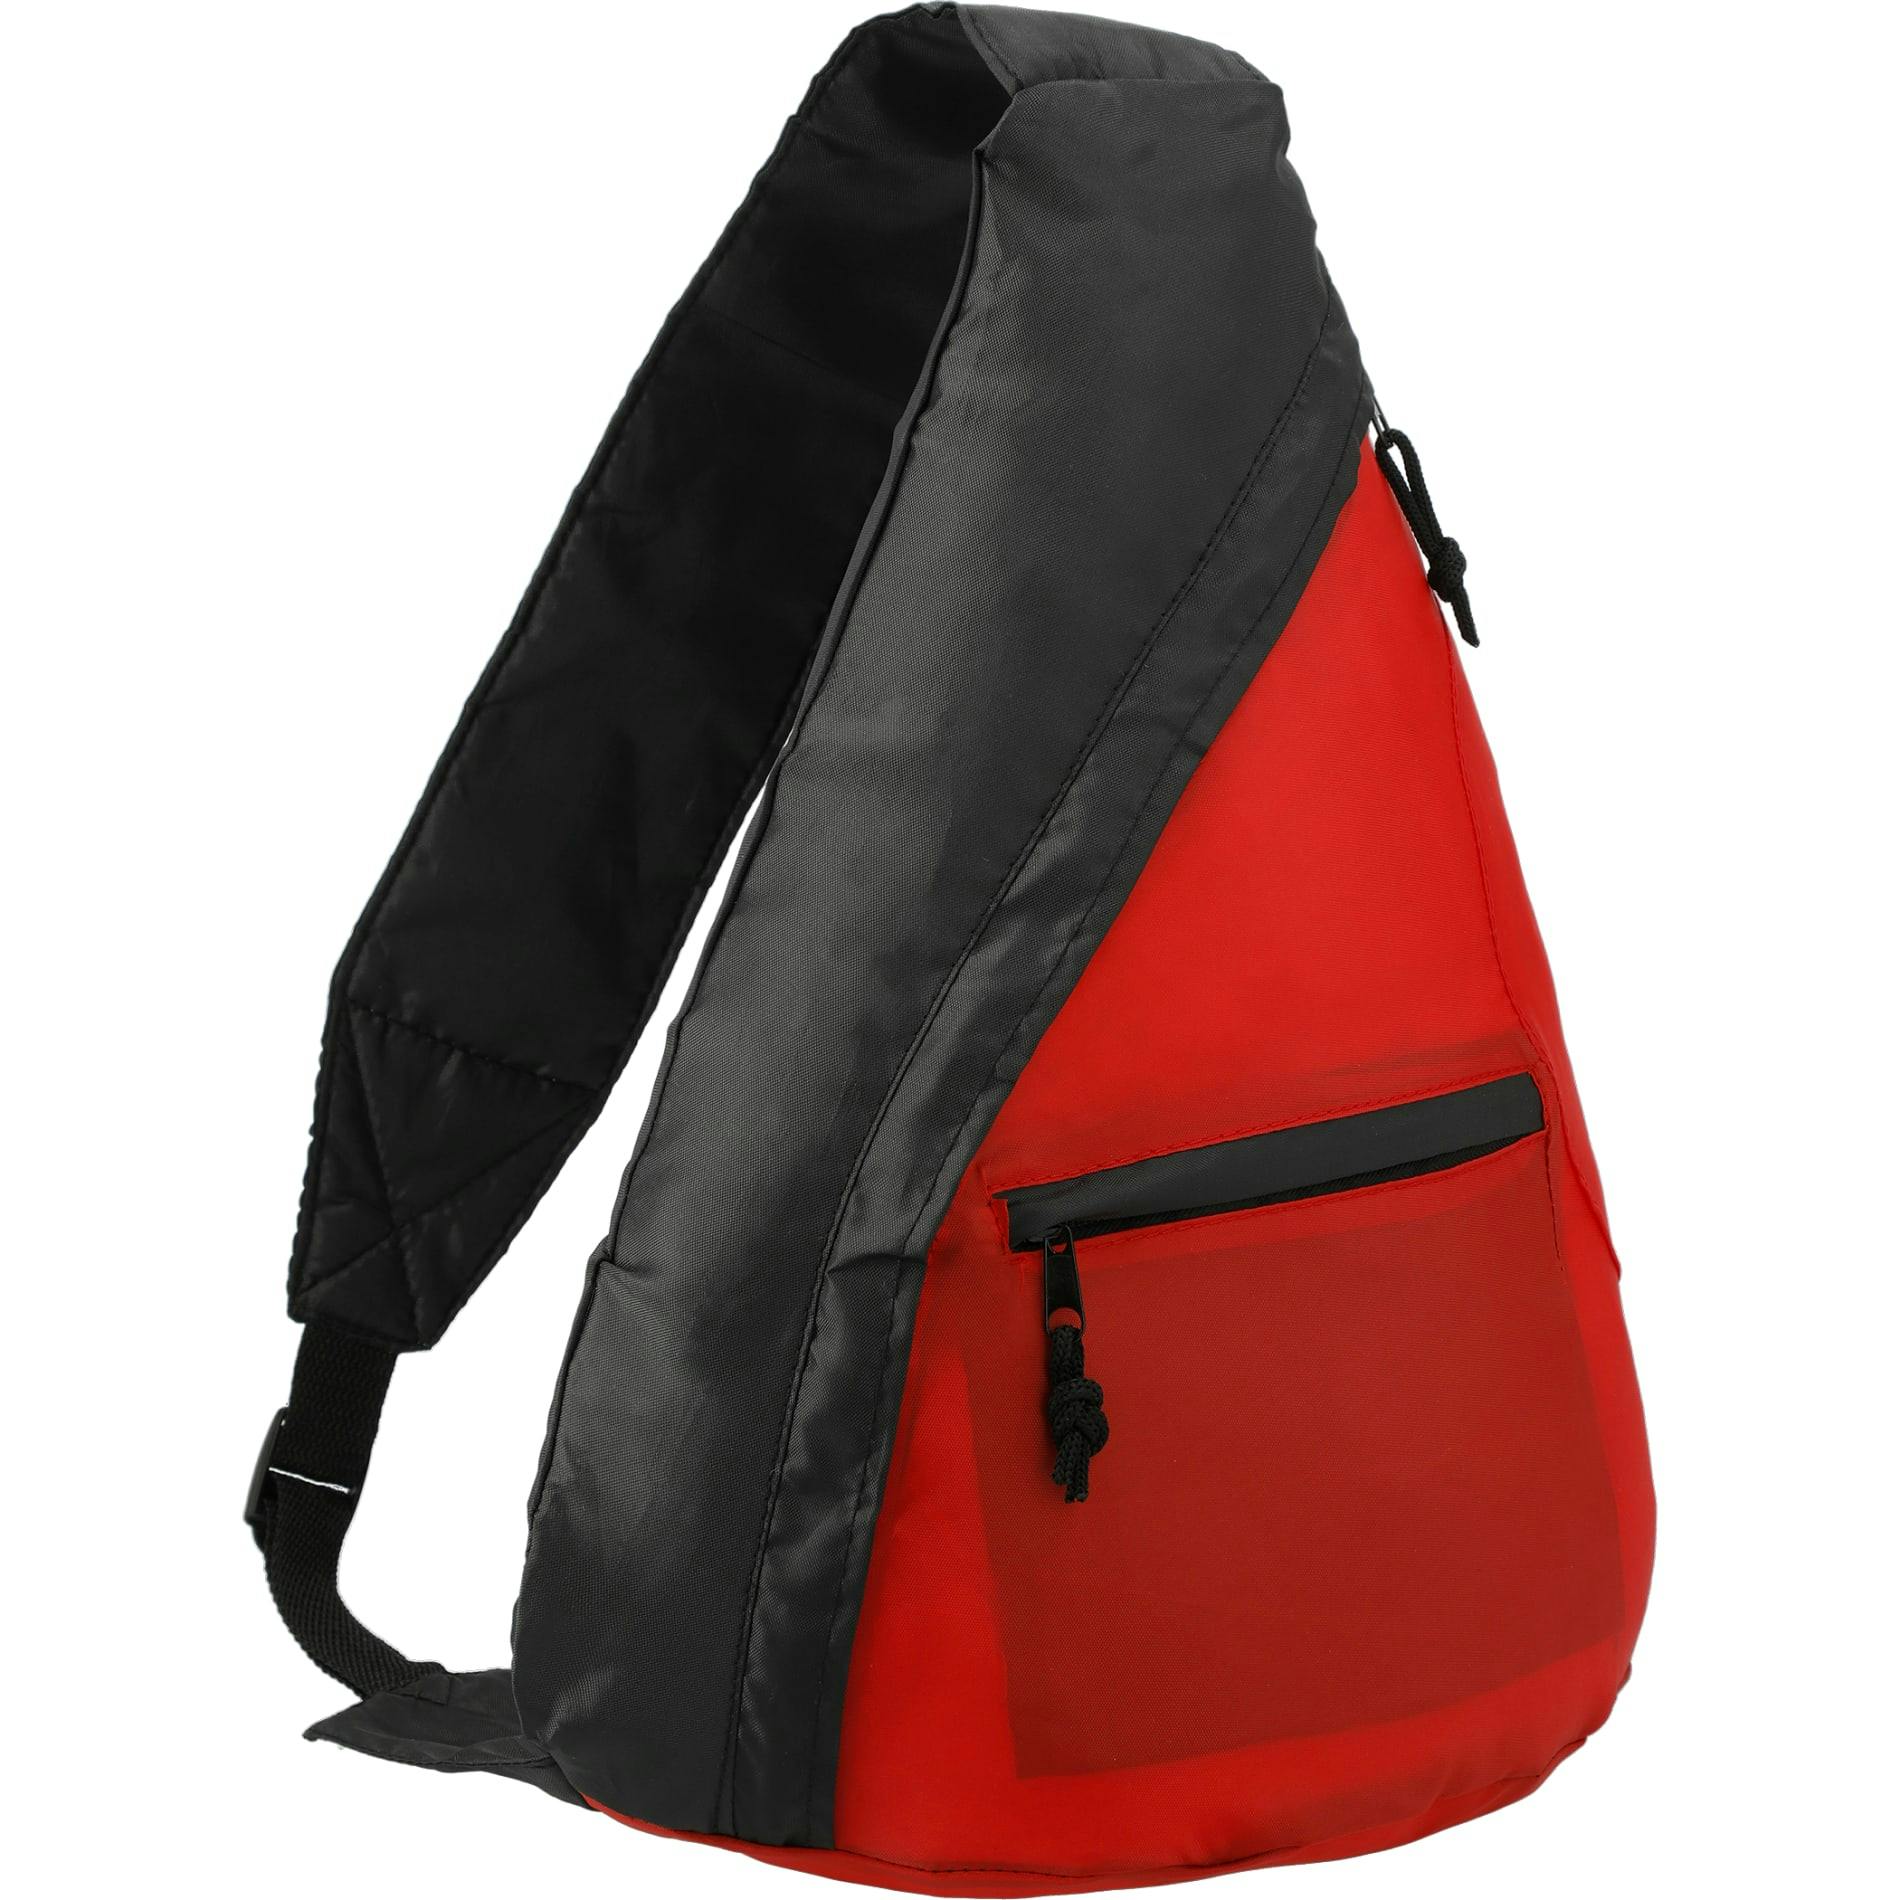 Downtown Sling Backpack - additional Image 2